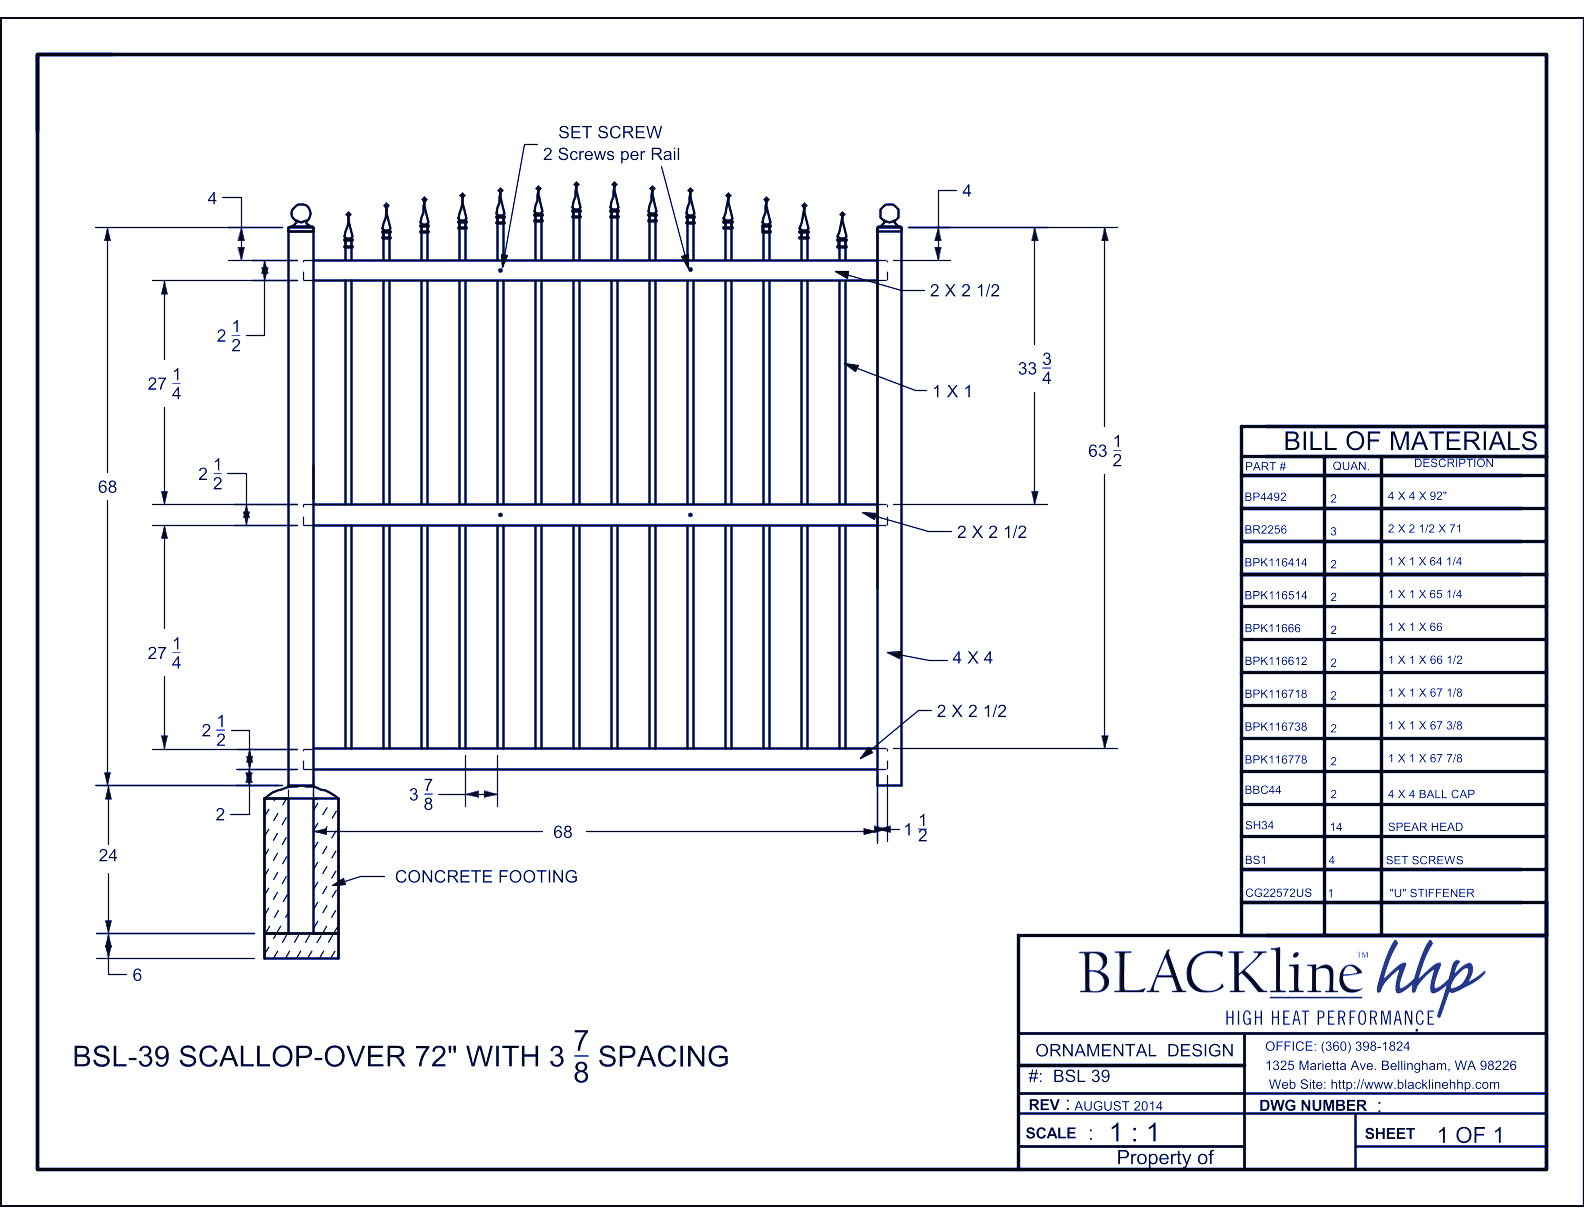 BSL-39: Scallop-Over 72" with 3 7/8” Spacing